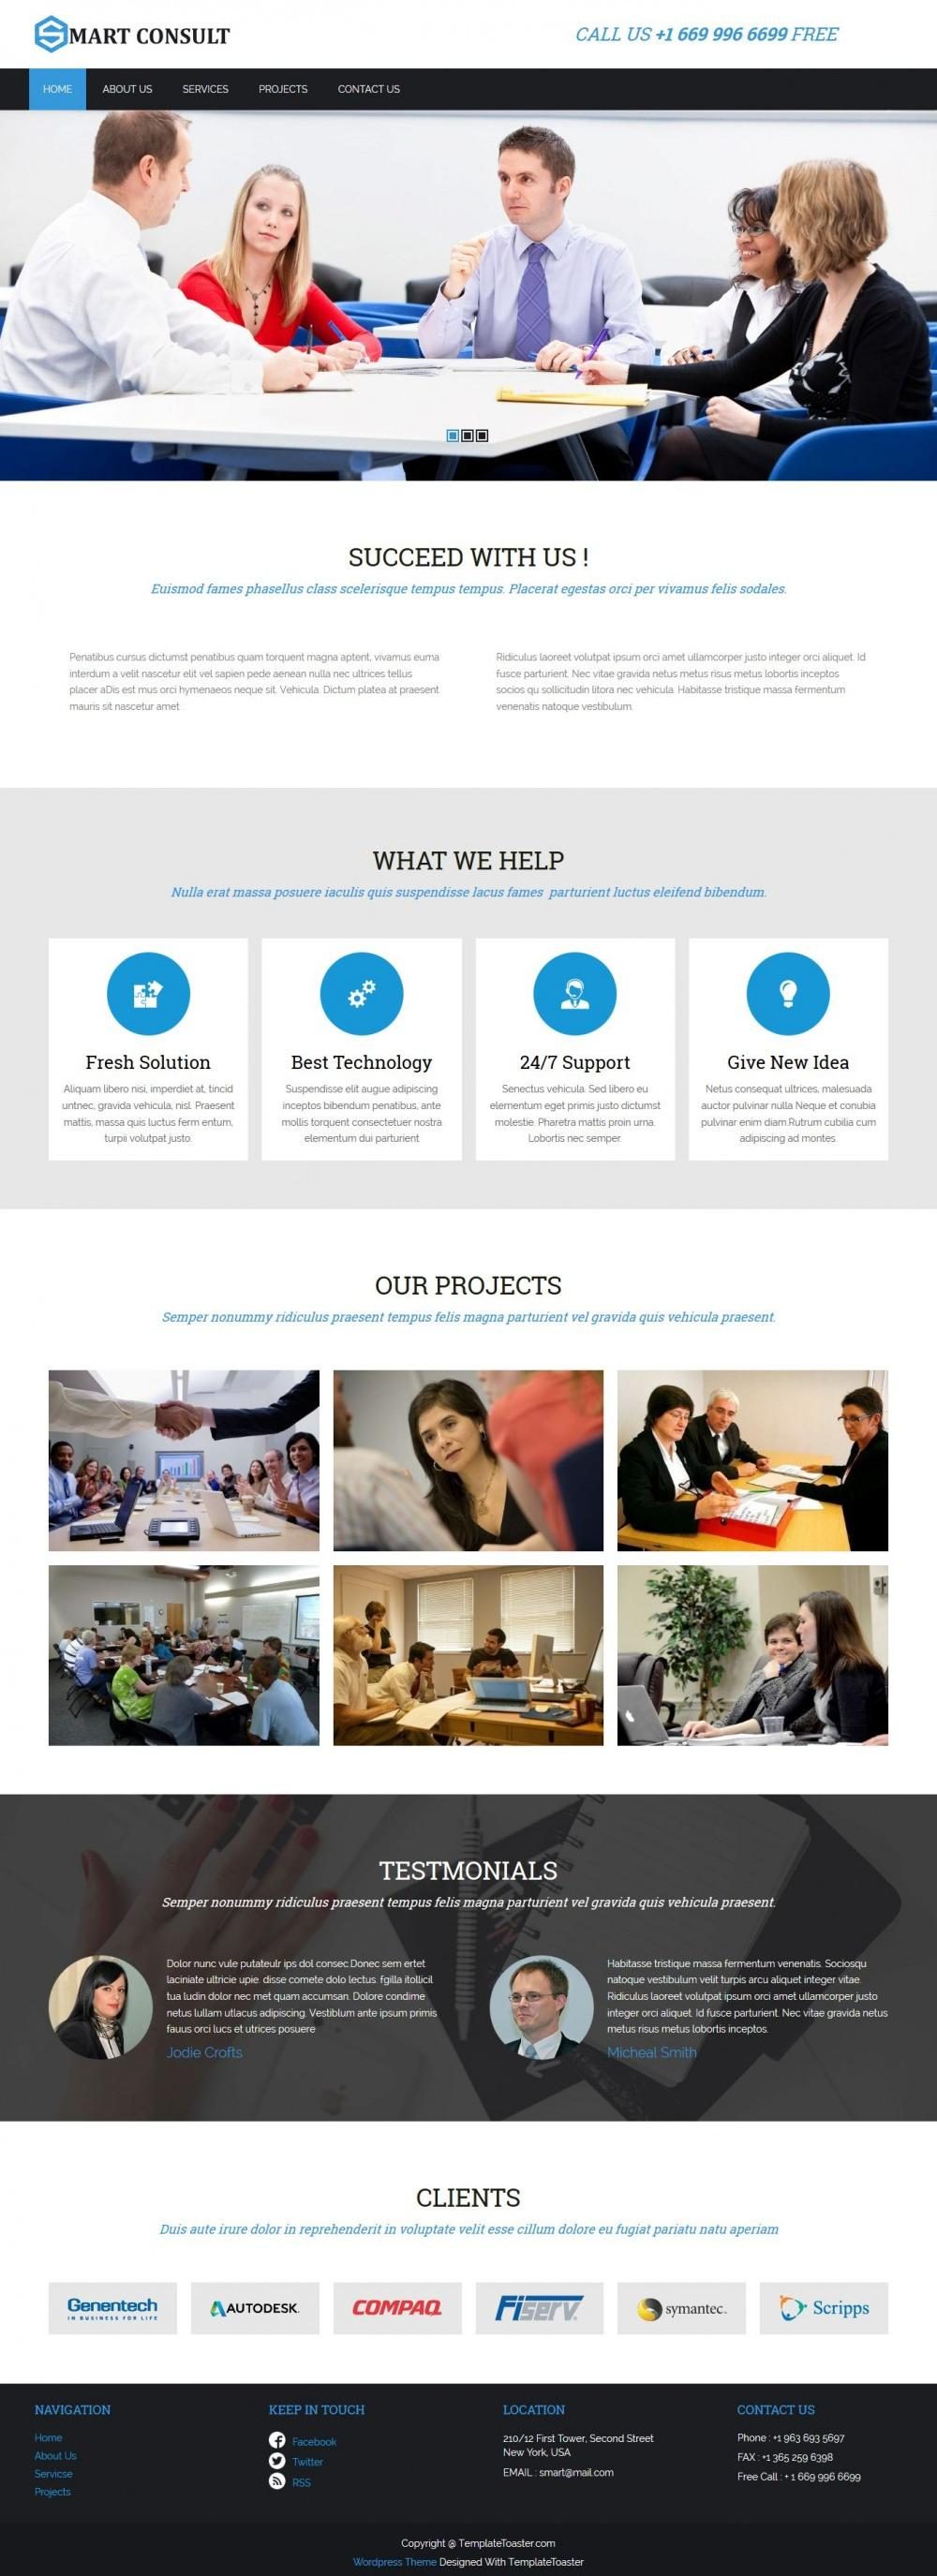 Smart Consultant Business Marketing Services HTML Template